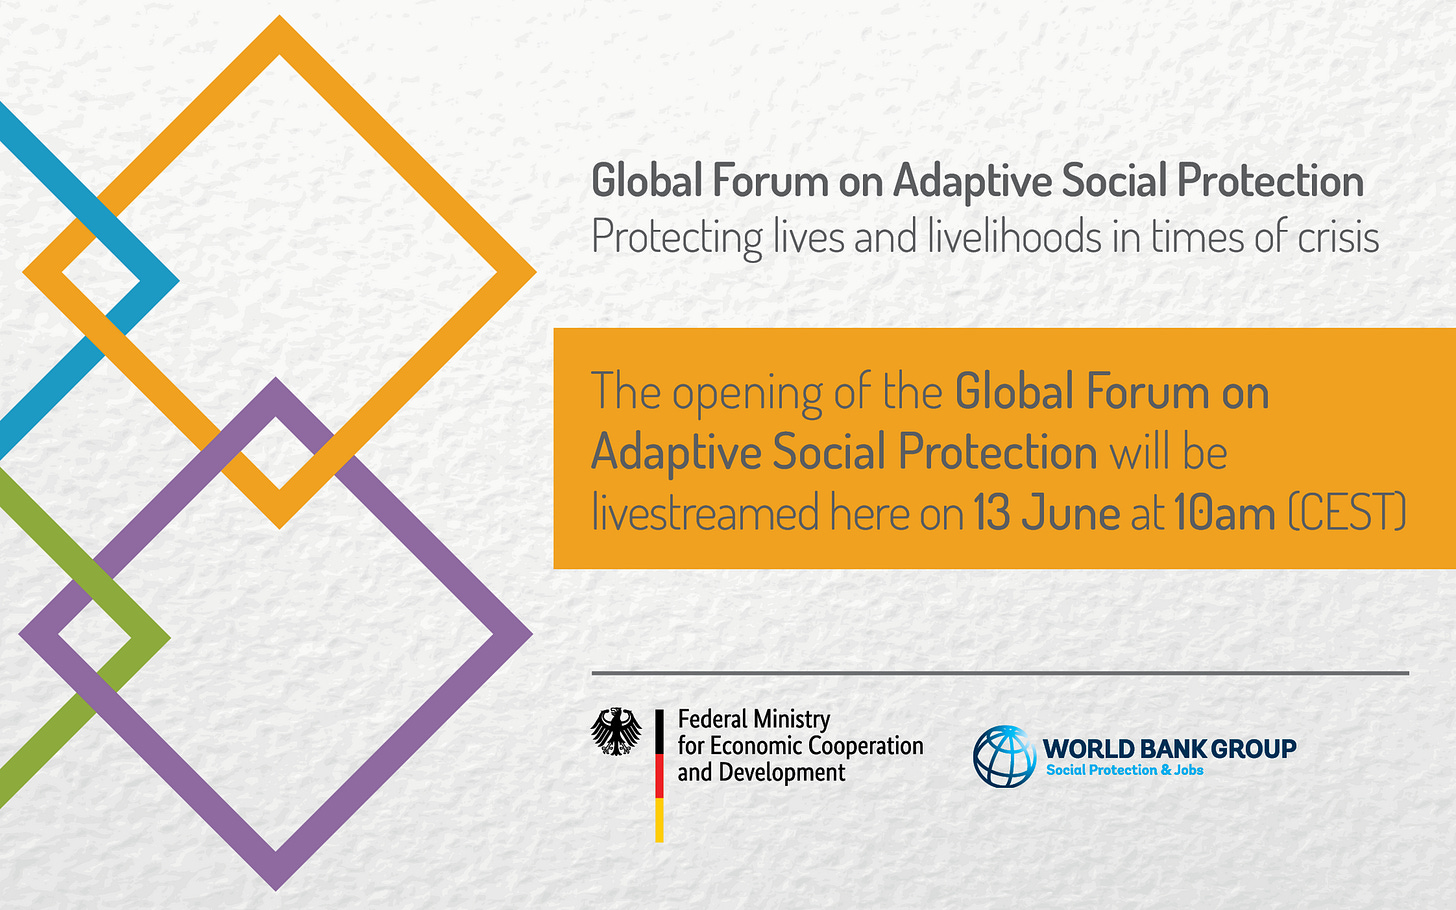 A poster for the Global Forum on Adaptive Social Protection, noting that it will be livestreamed starting 13 June